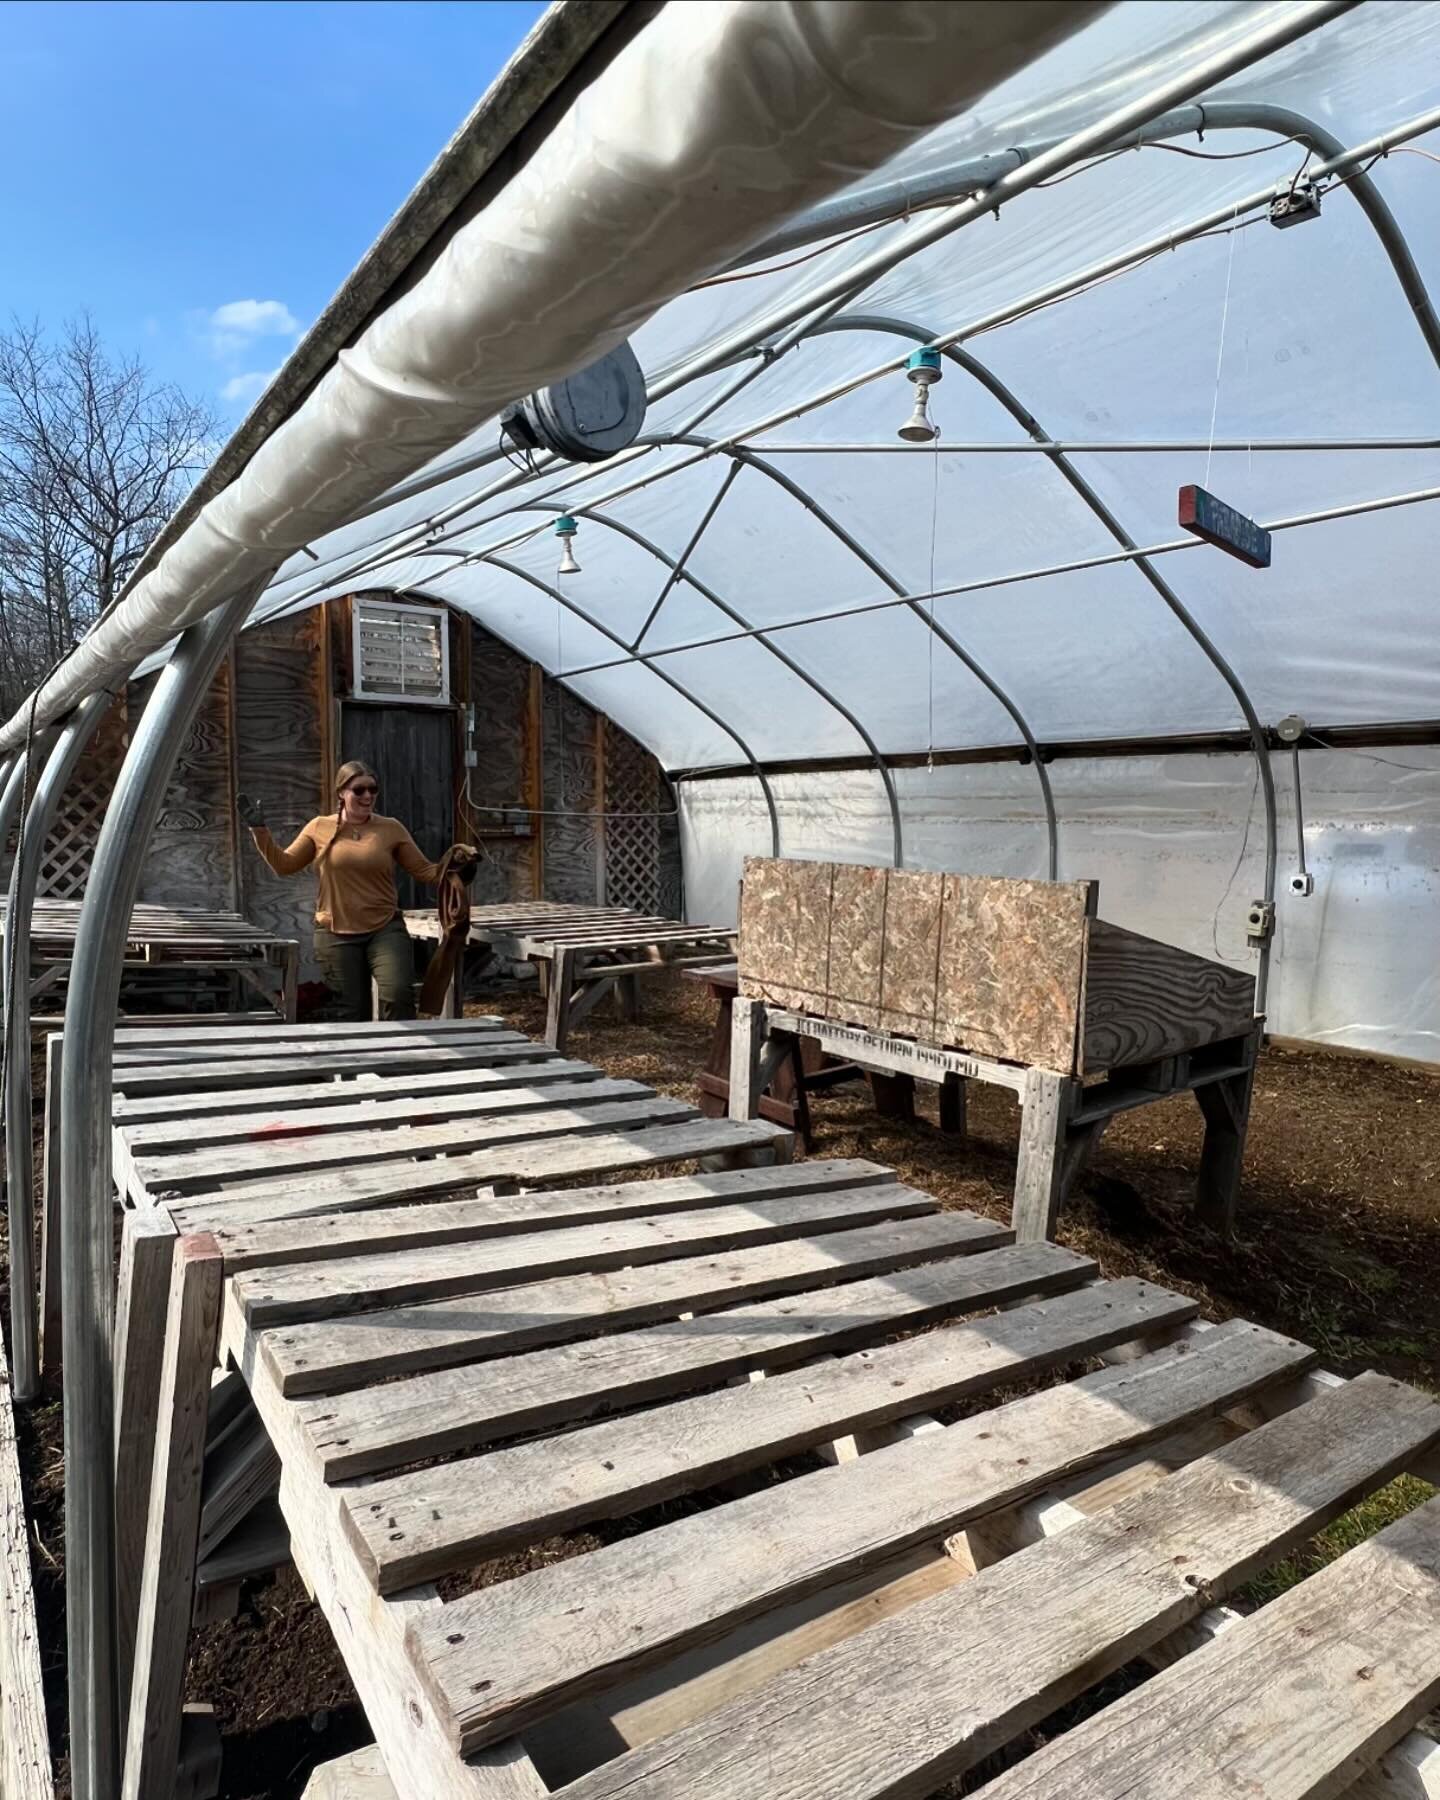 Getting the greenhouse ready! My favorite part of the garden season is about to begin&hellip;
🌱 🌱🌱🌱🌱🌱🌱🌱🌱🌱🌱🌱🌱🌱